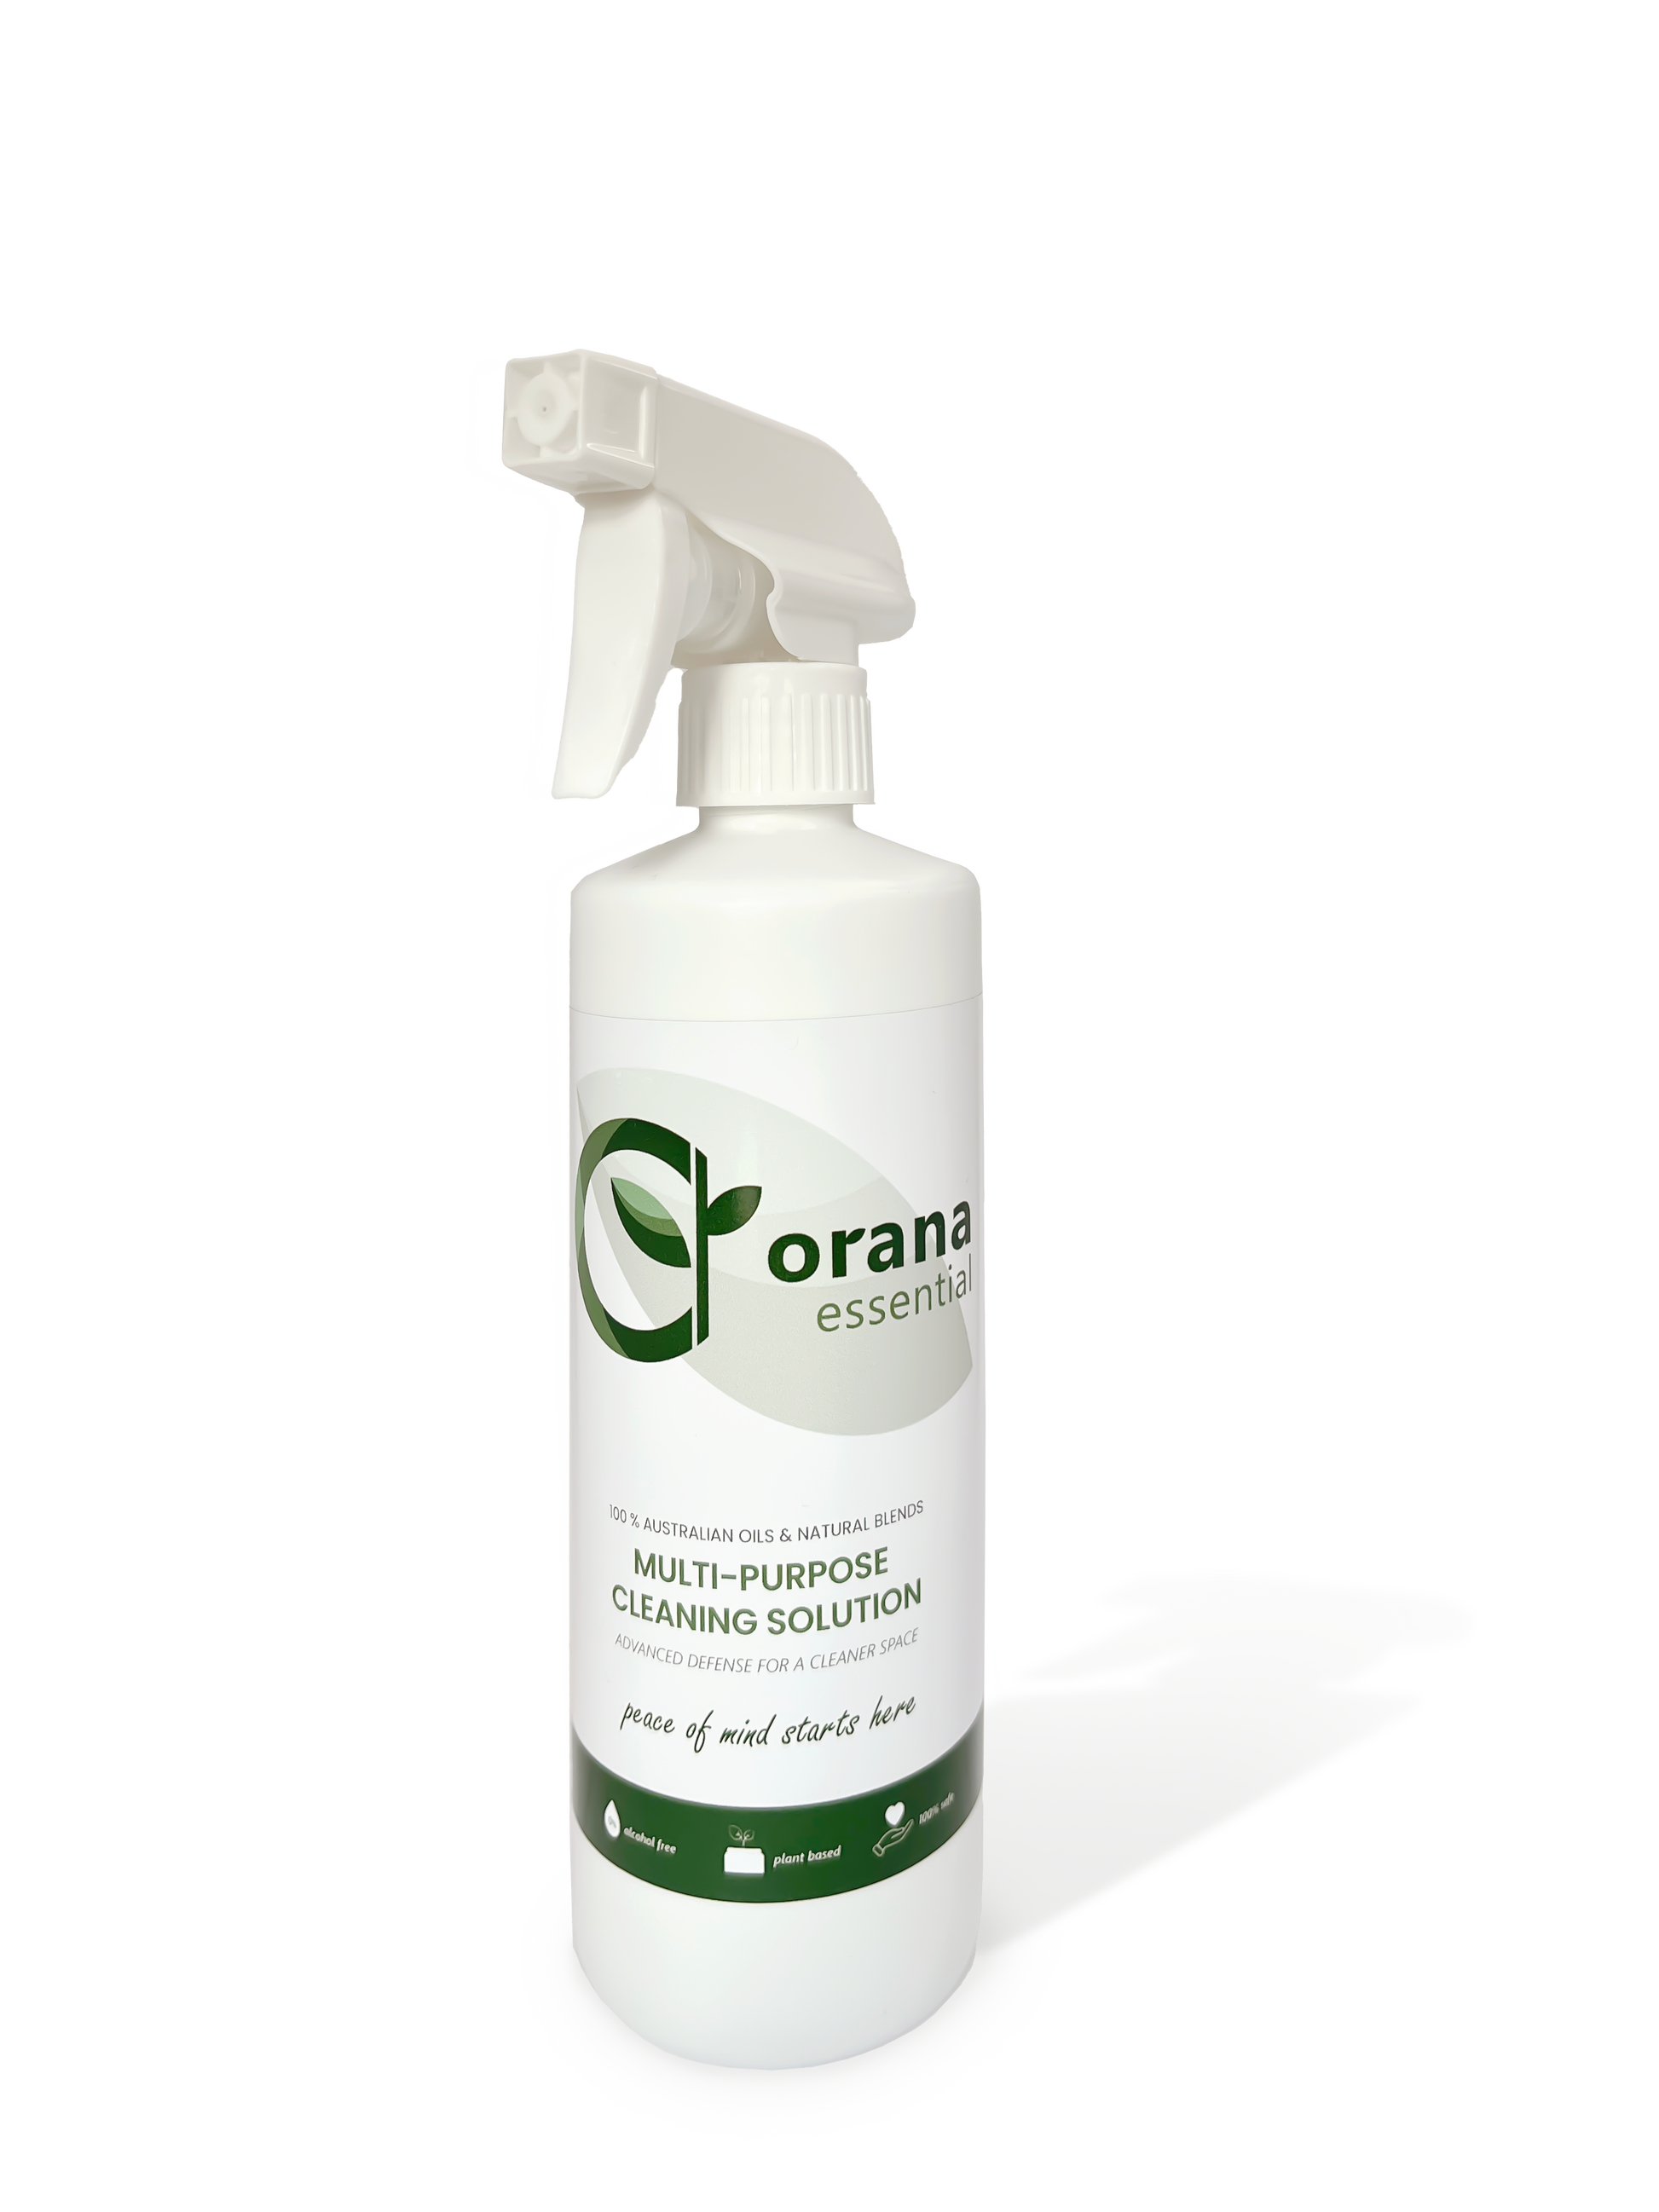 Picture of the multi-purpose cleaning solution, green product, eco friendly, chemical free. This is the front of the bottle